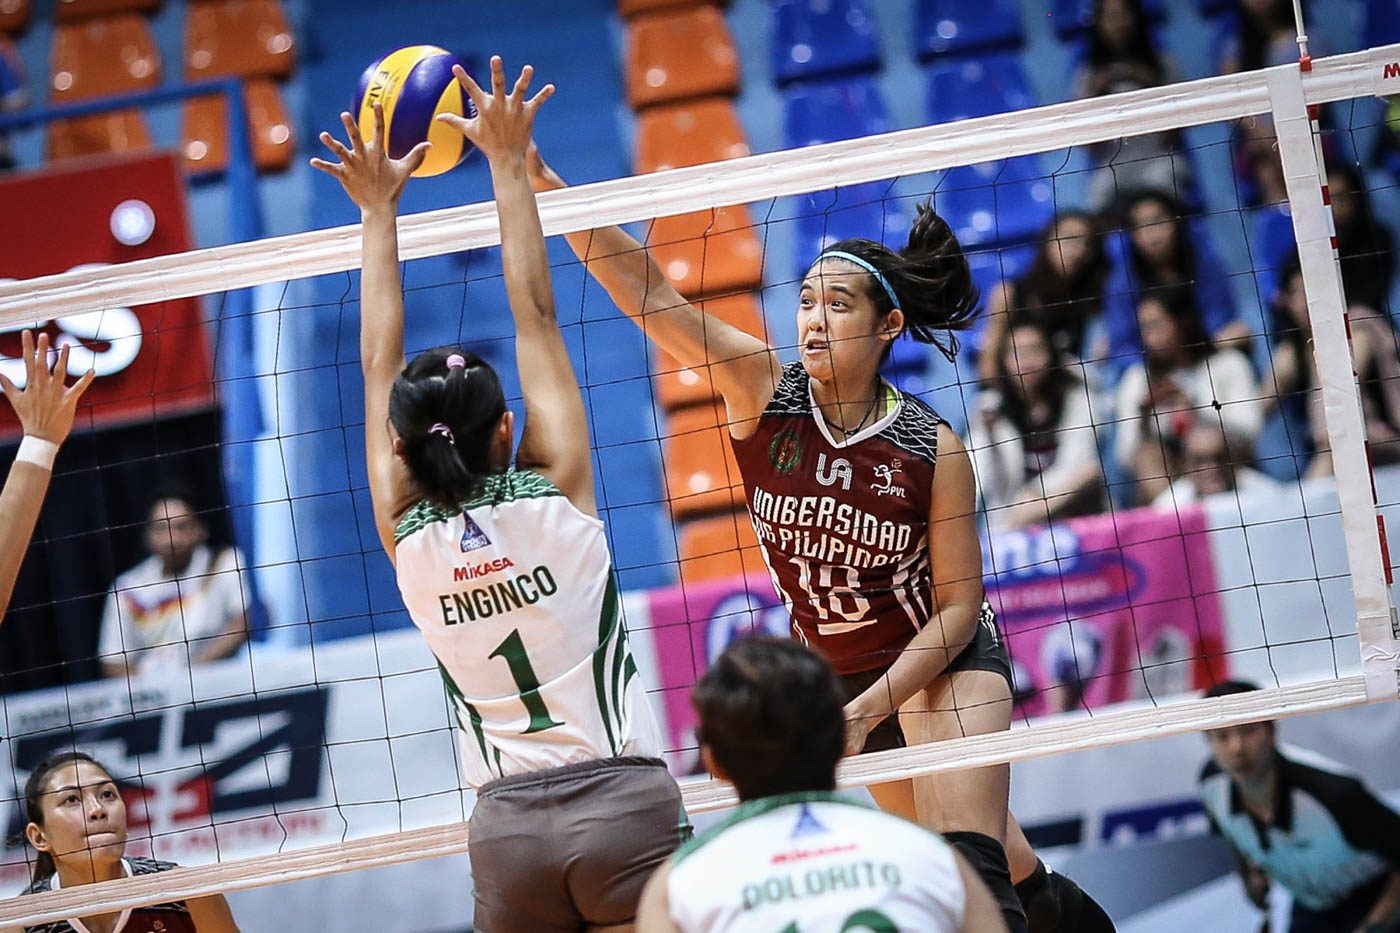 PVL: UP Lady Maroons make quick work of CSB